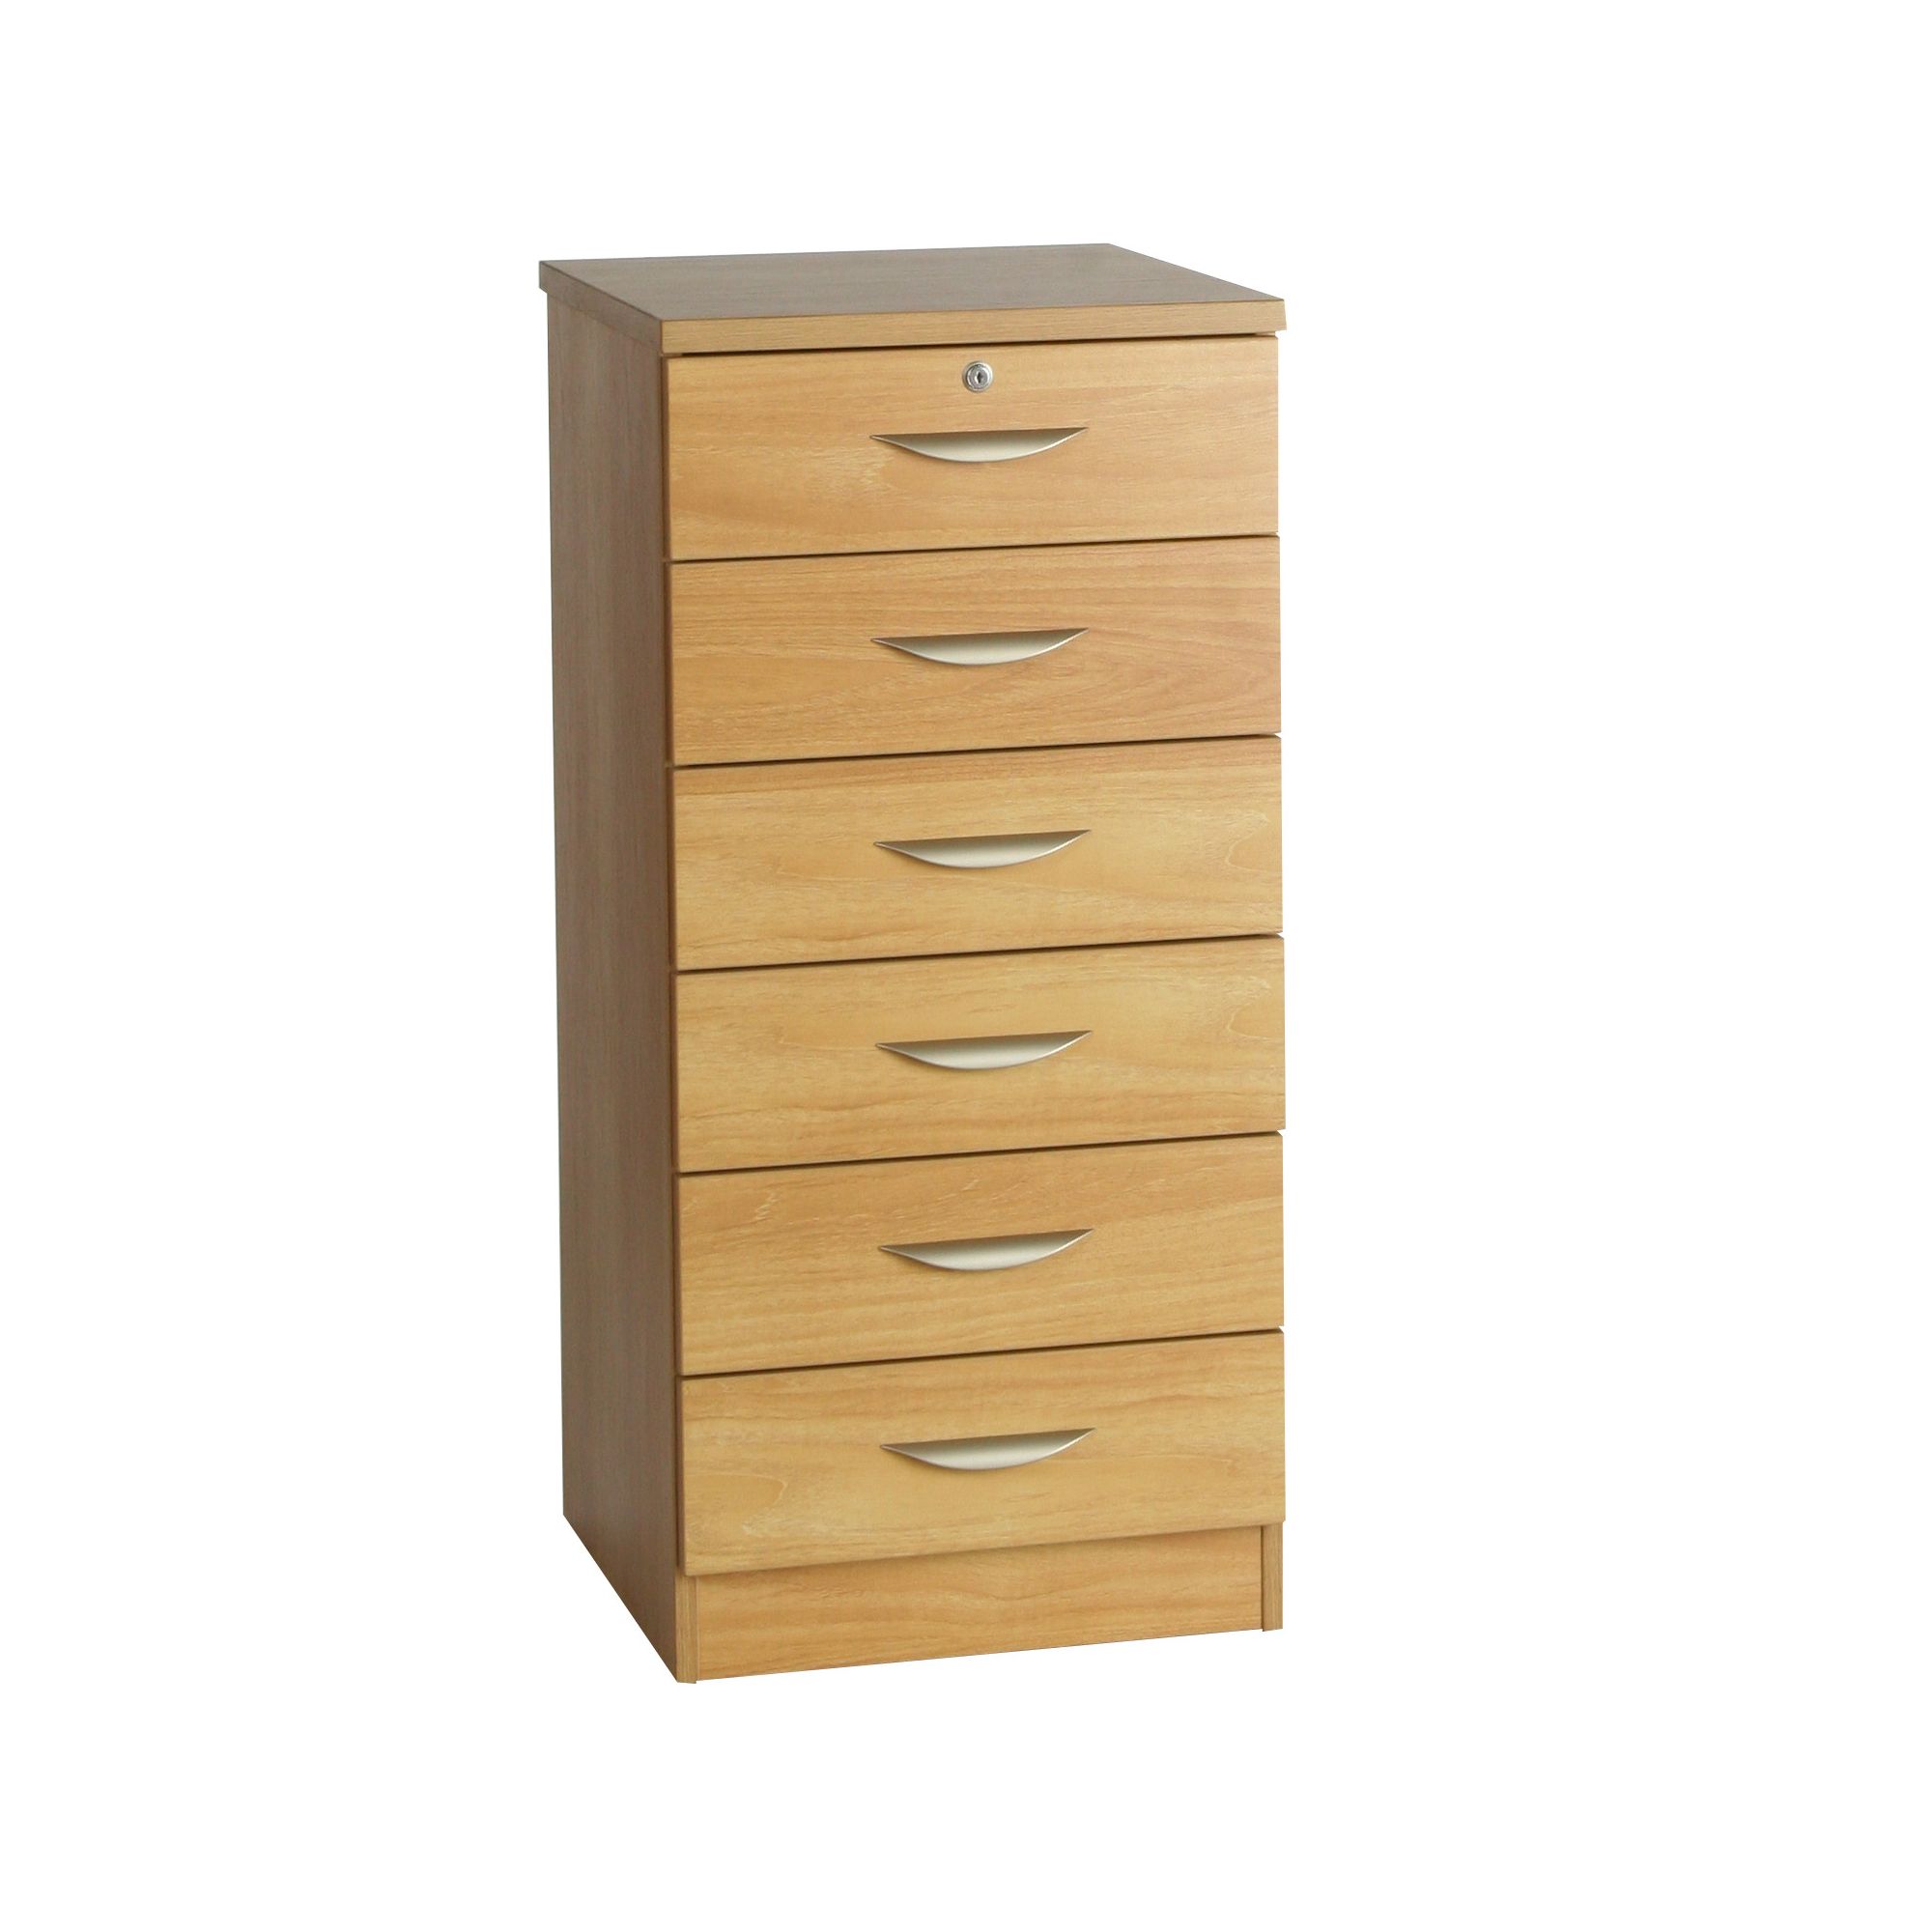 R White Cabinets Six Drawer Wooden Home Office Unit - Warm Oak at Tesco Direct